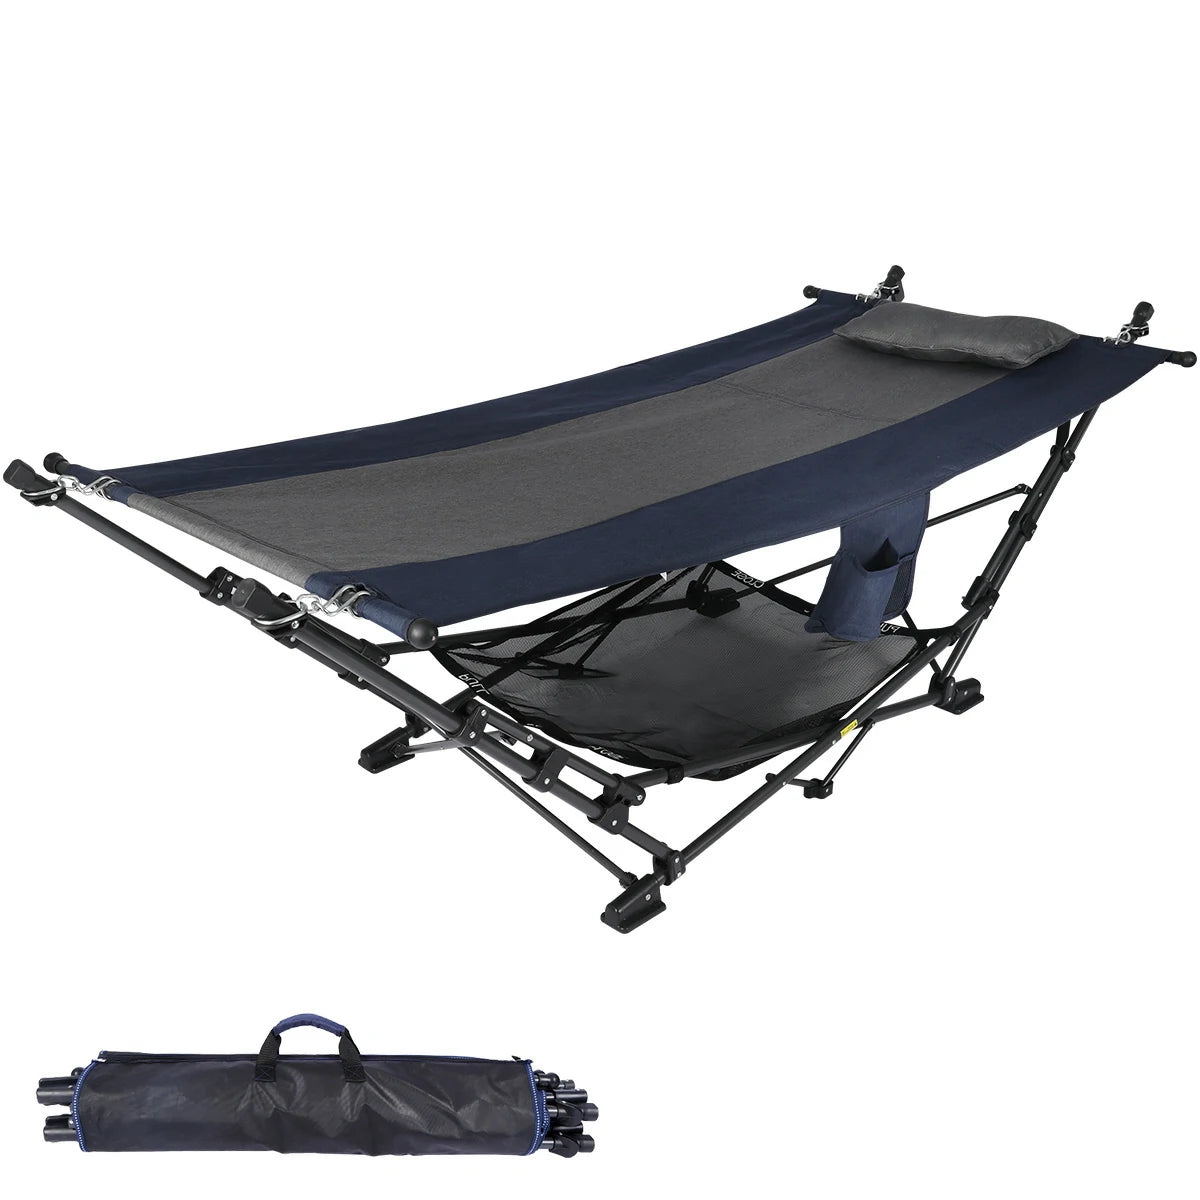 Freestanding Portable Hammock with Stand for Outdoor Yard Beach, 300lbs Capacity